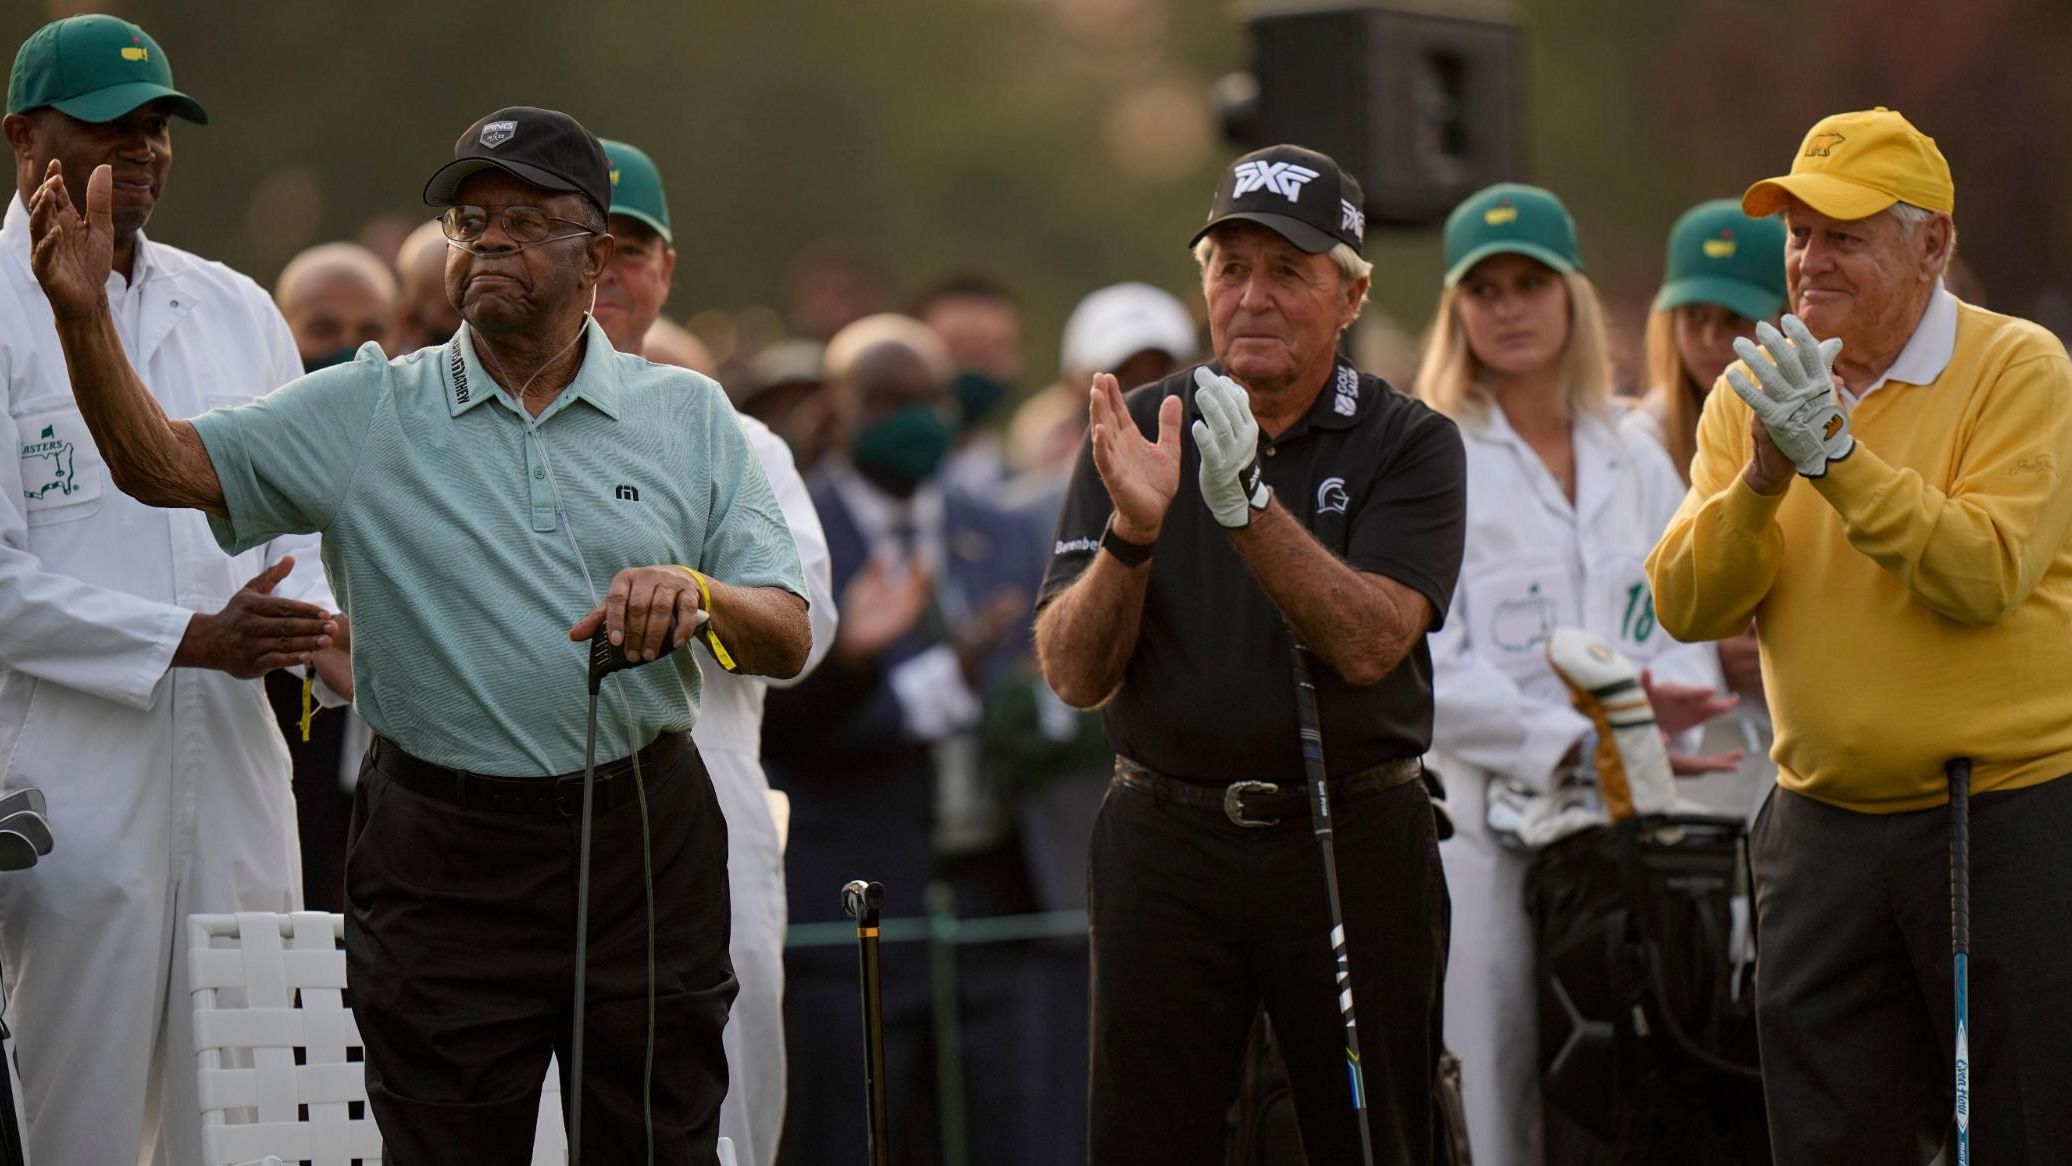 Lee Elder acknowledges applause as he joins Gary Player and Jack Nicklaus as honorary starters on Thursday. In 1975, Elder became the first African American to play in the Masters.